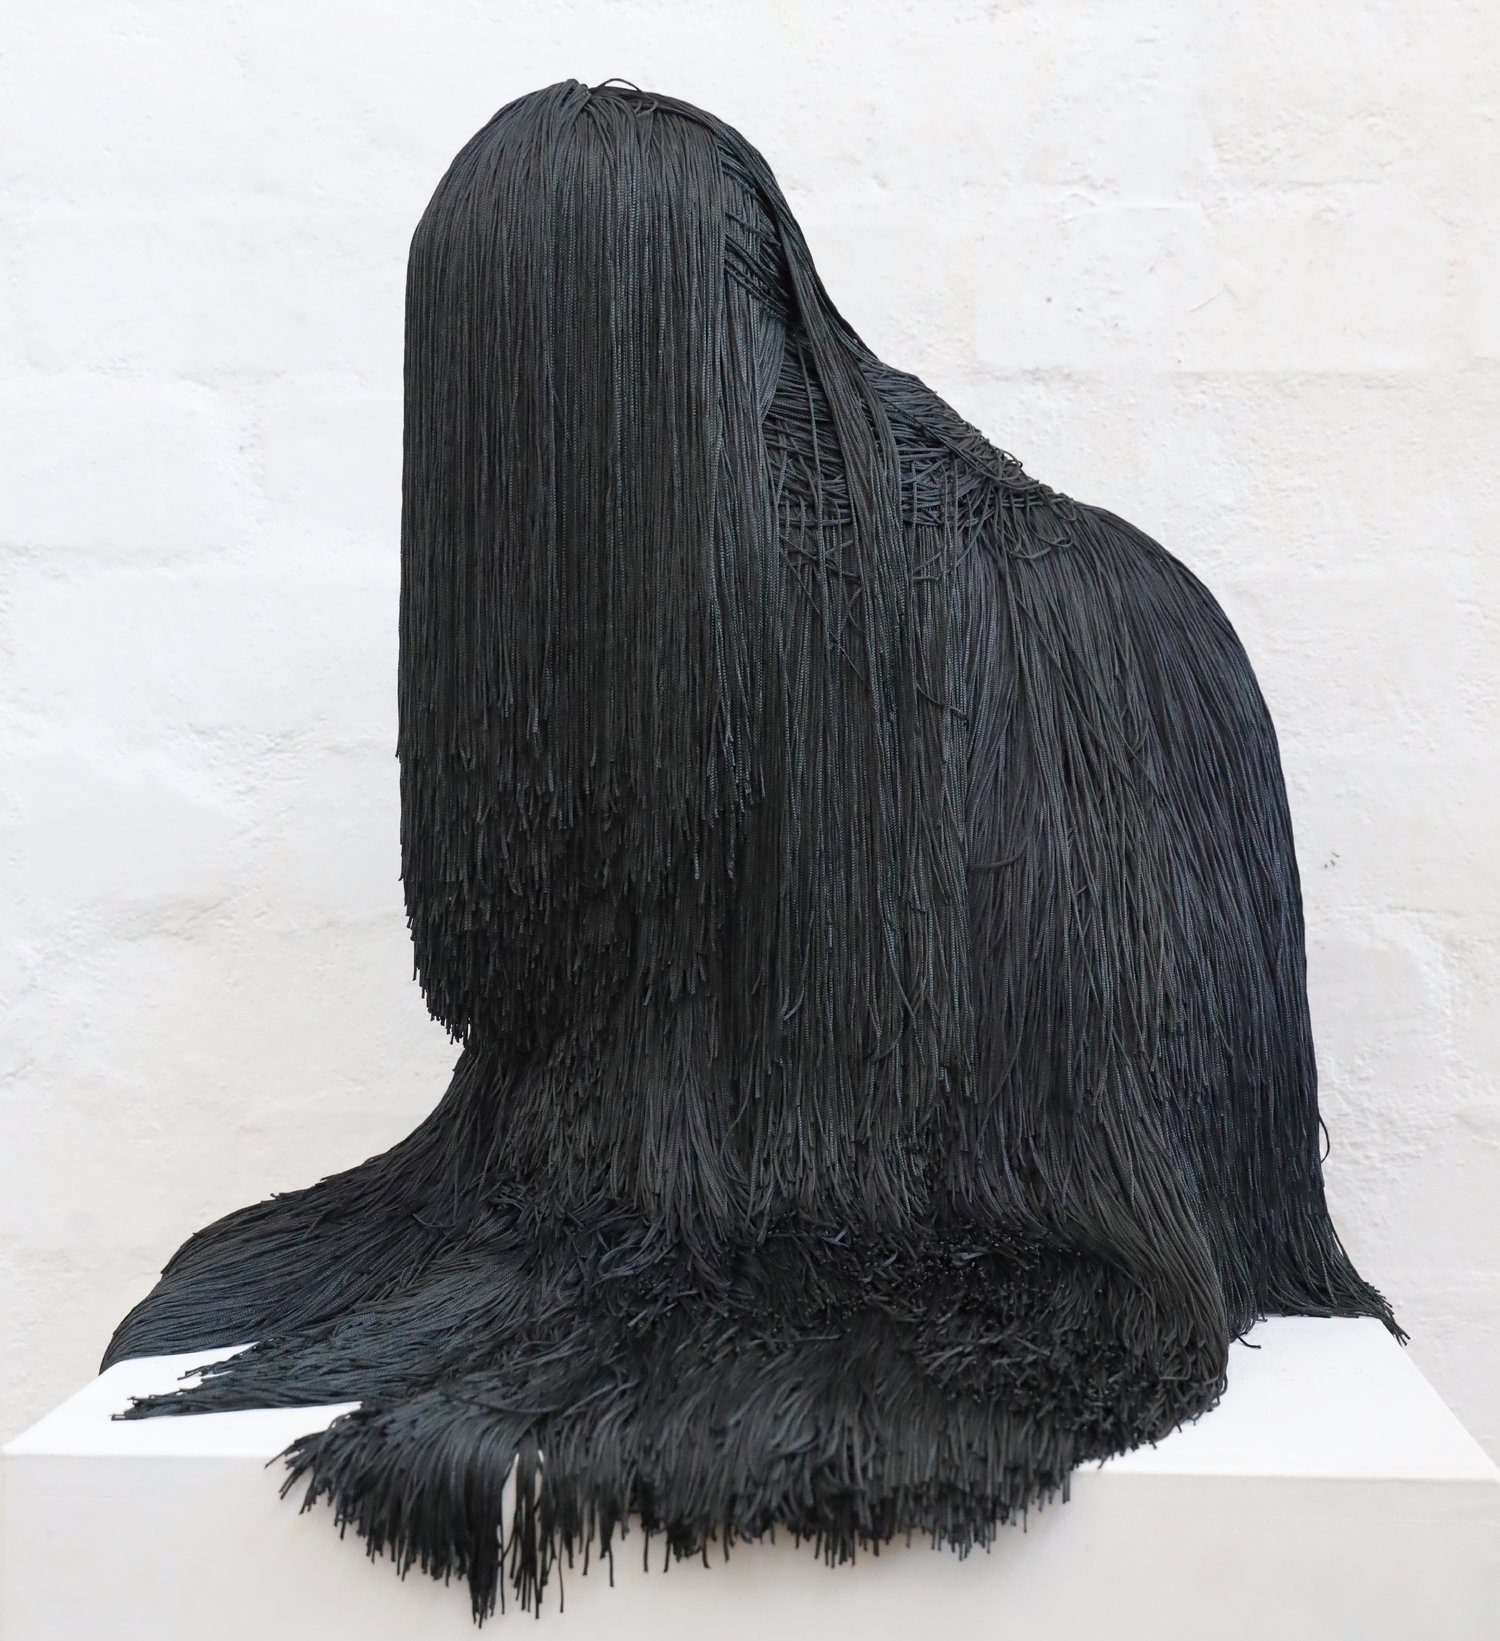 Swaths of Colorful Fringe Disguise Animalistic Sculptures by Artist Troy Emery | 国外美陈 美陈网站 美陈前沿 